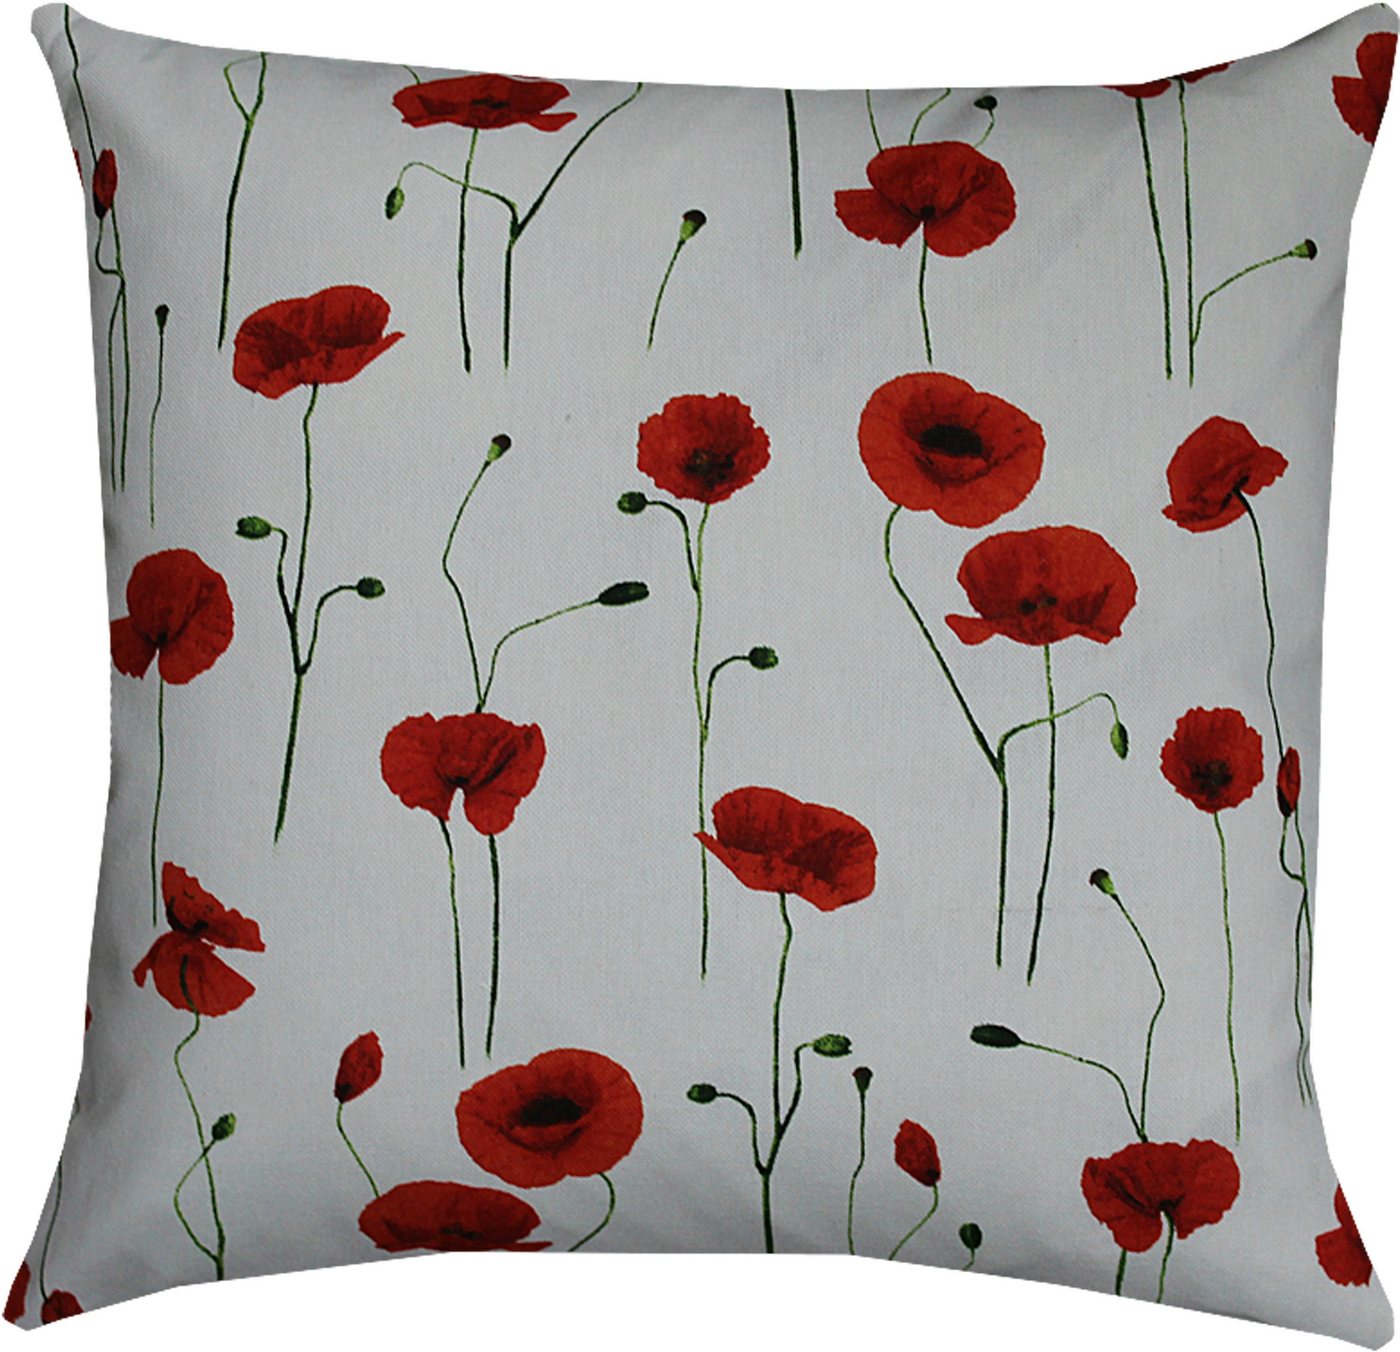 Kissenhülle Papaver, HOSSNER - HOMECOLLECTION (1 Stück) von HOSSNER - HOMECOLLECTION